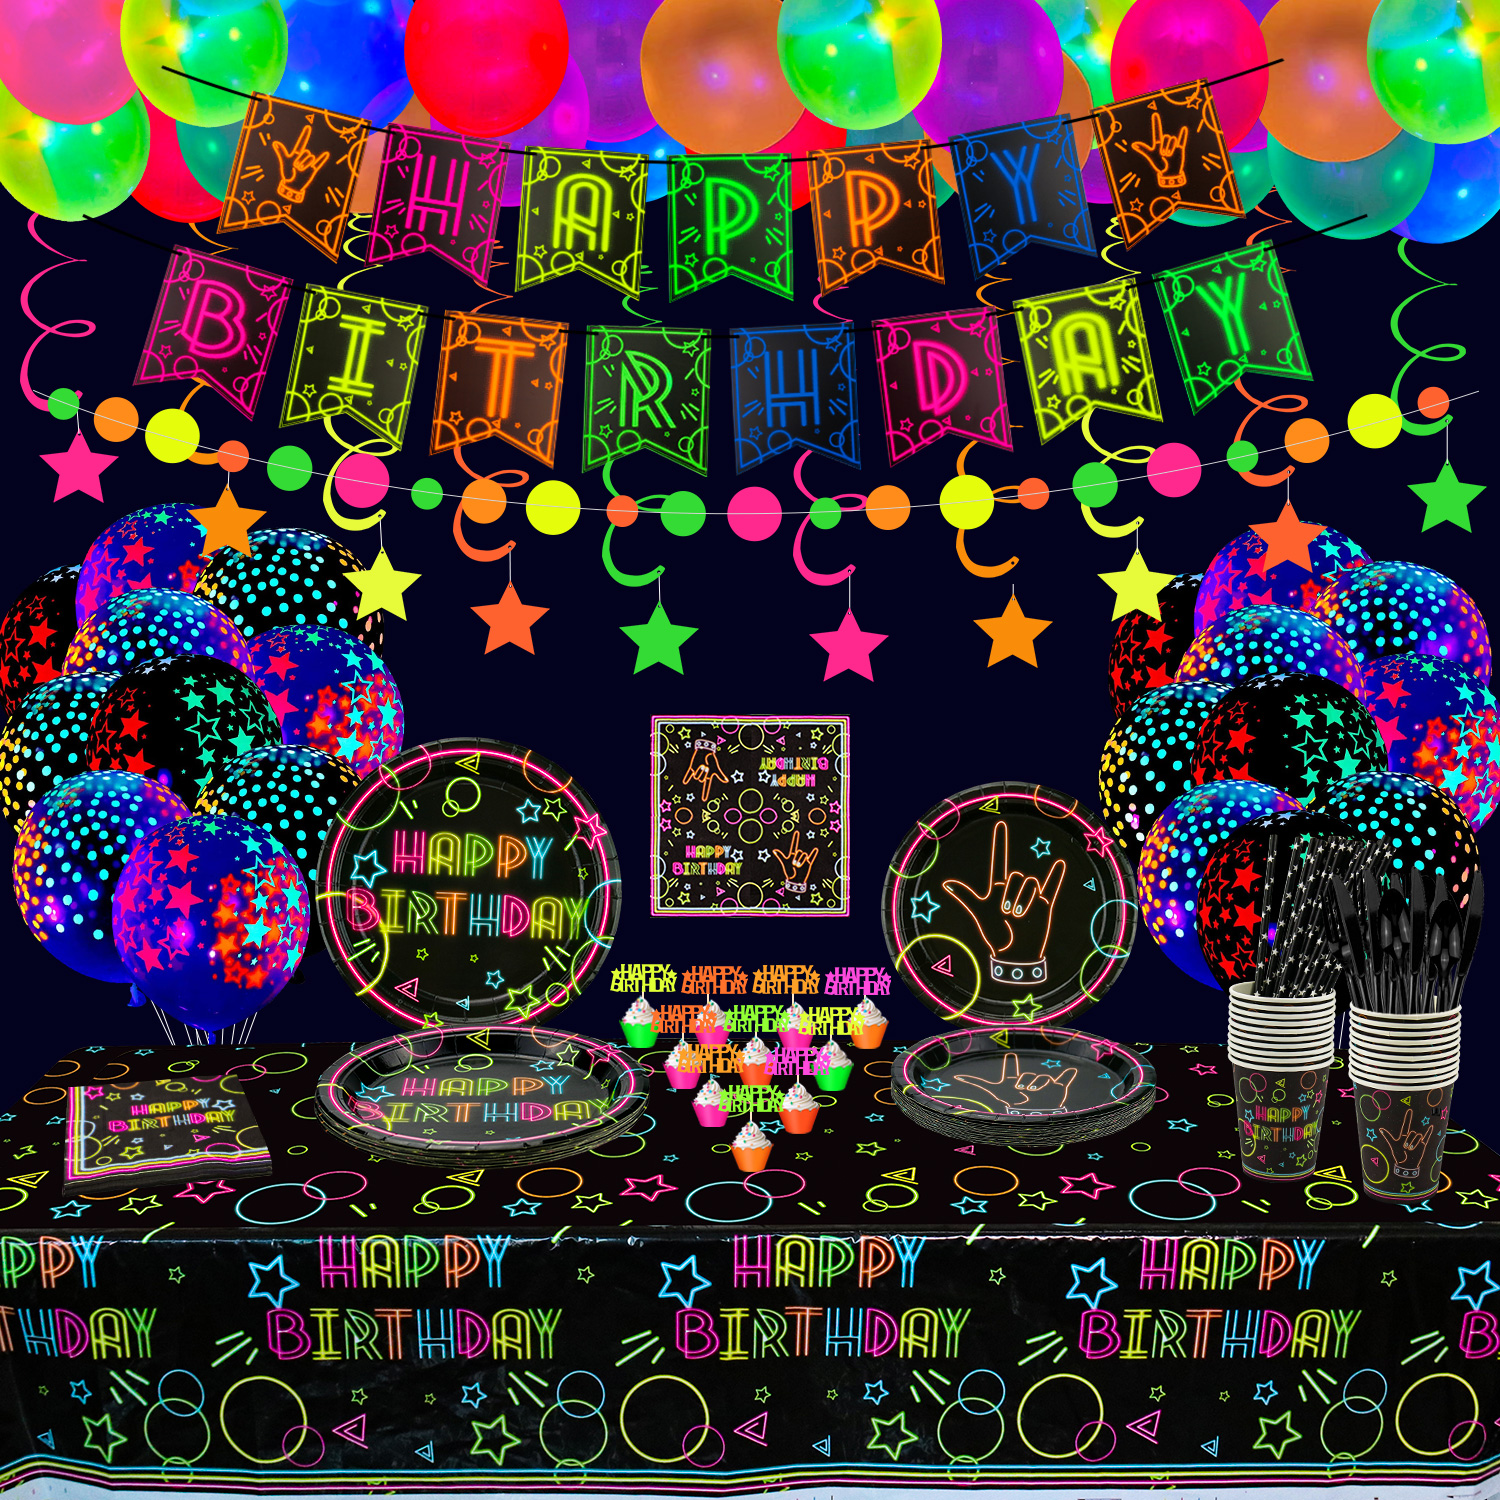 Glow Neon Party Supplies - Neon Balloon, Glow in the Dark Happy Birthday  Banner, Hanging Swirls, Cake Topper, Tablecloth, Plates, Napkins, Cup for Blacklight  Party Decorations, Serves 20 Guest 